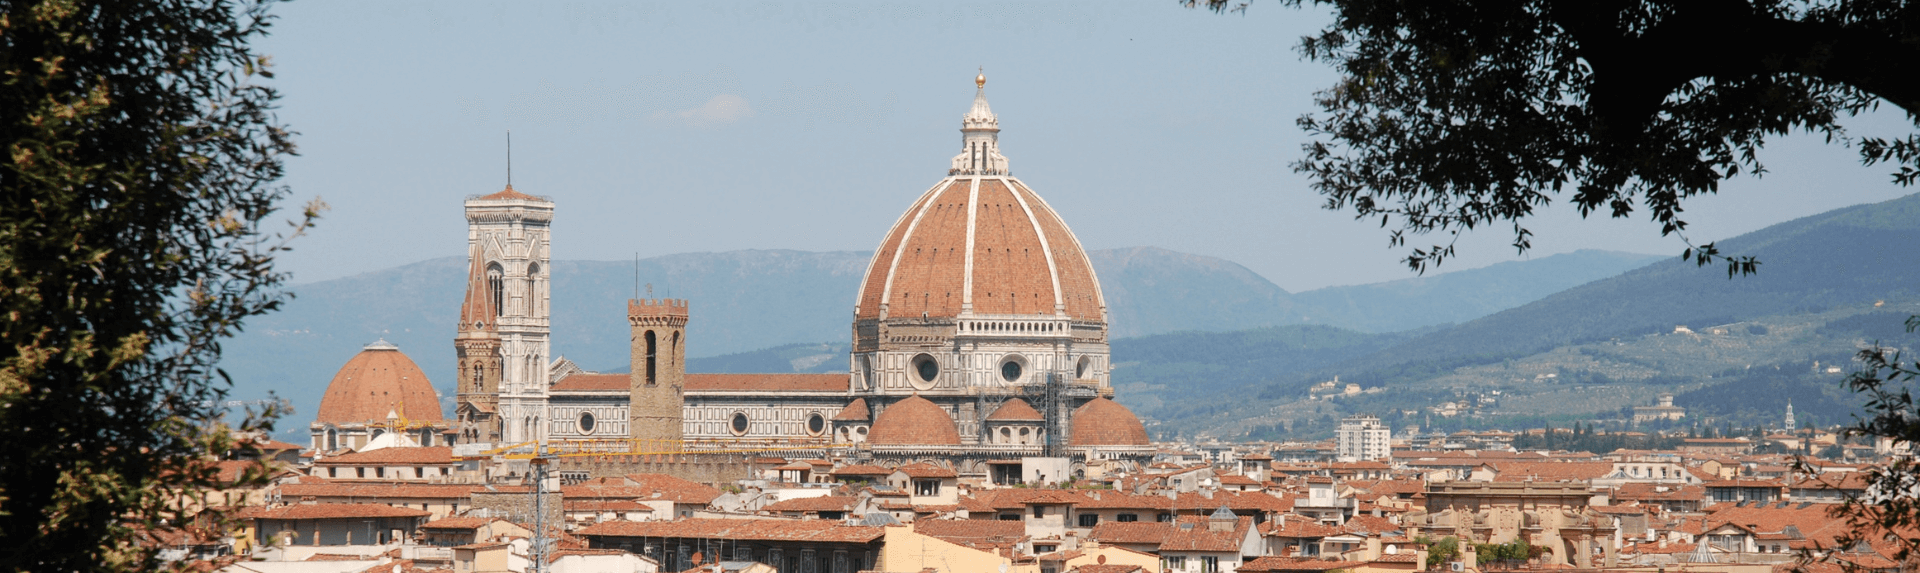 How to spend a day in Florence